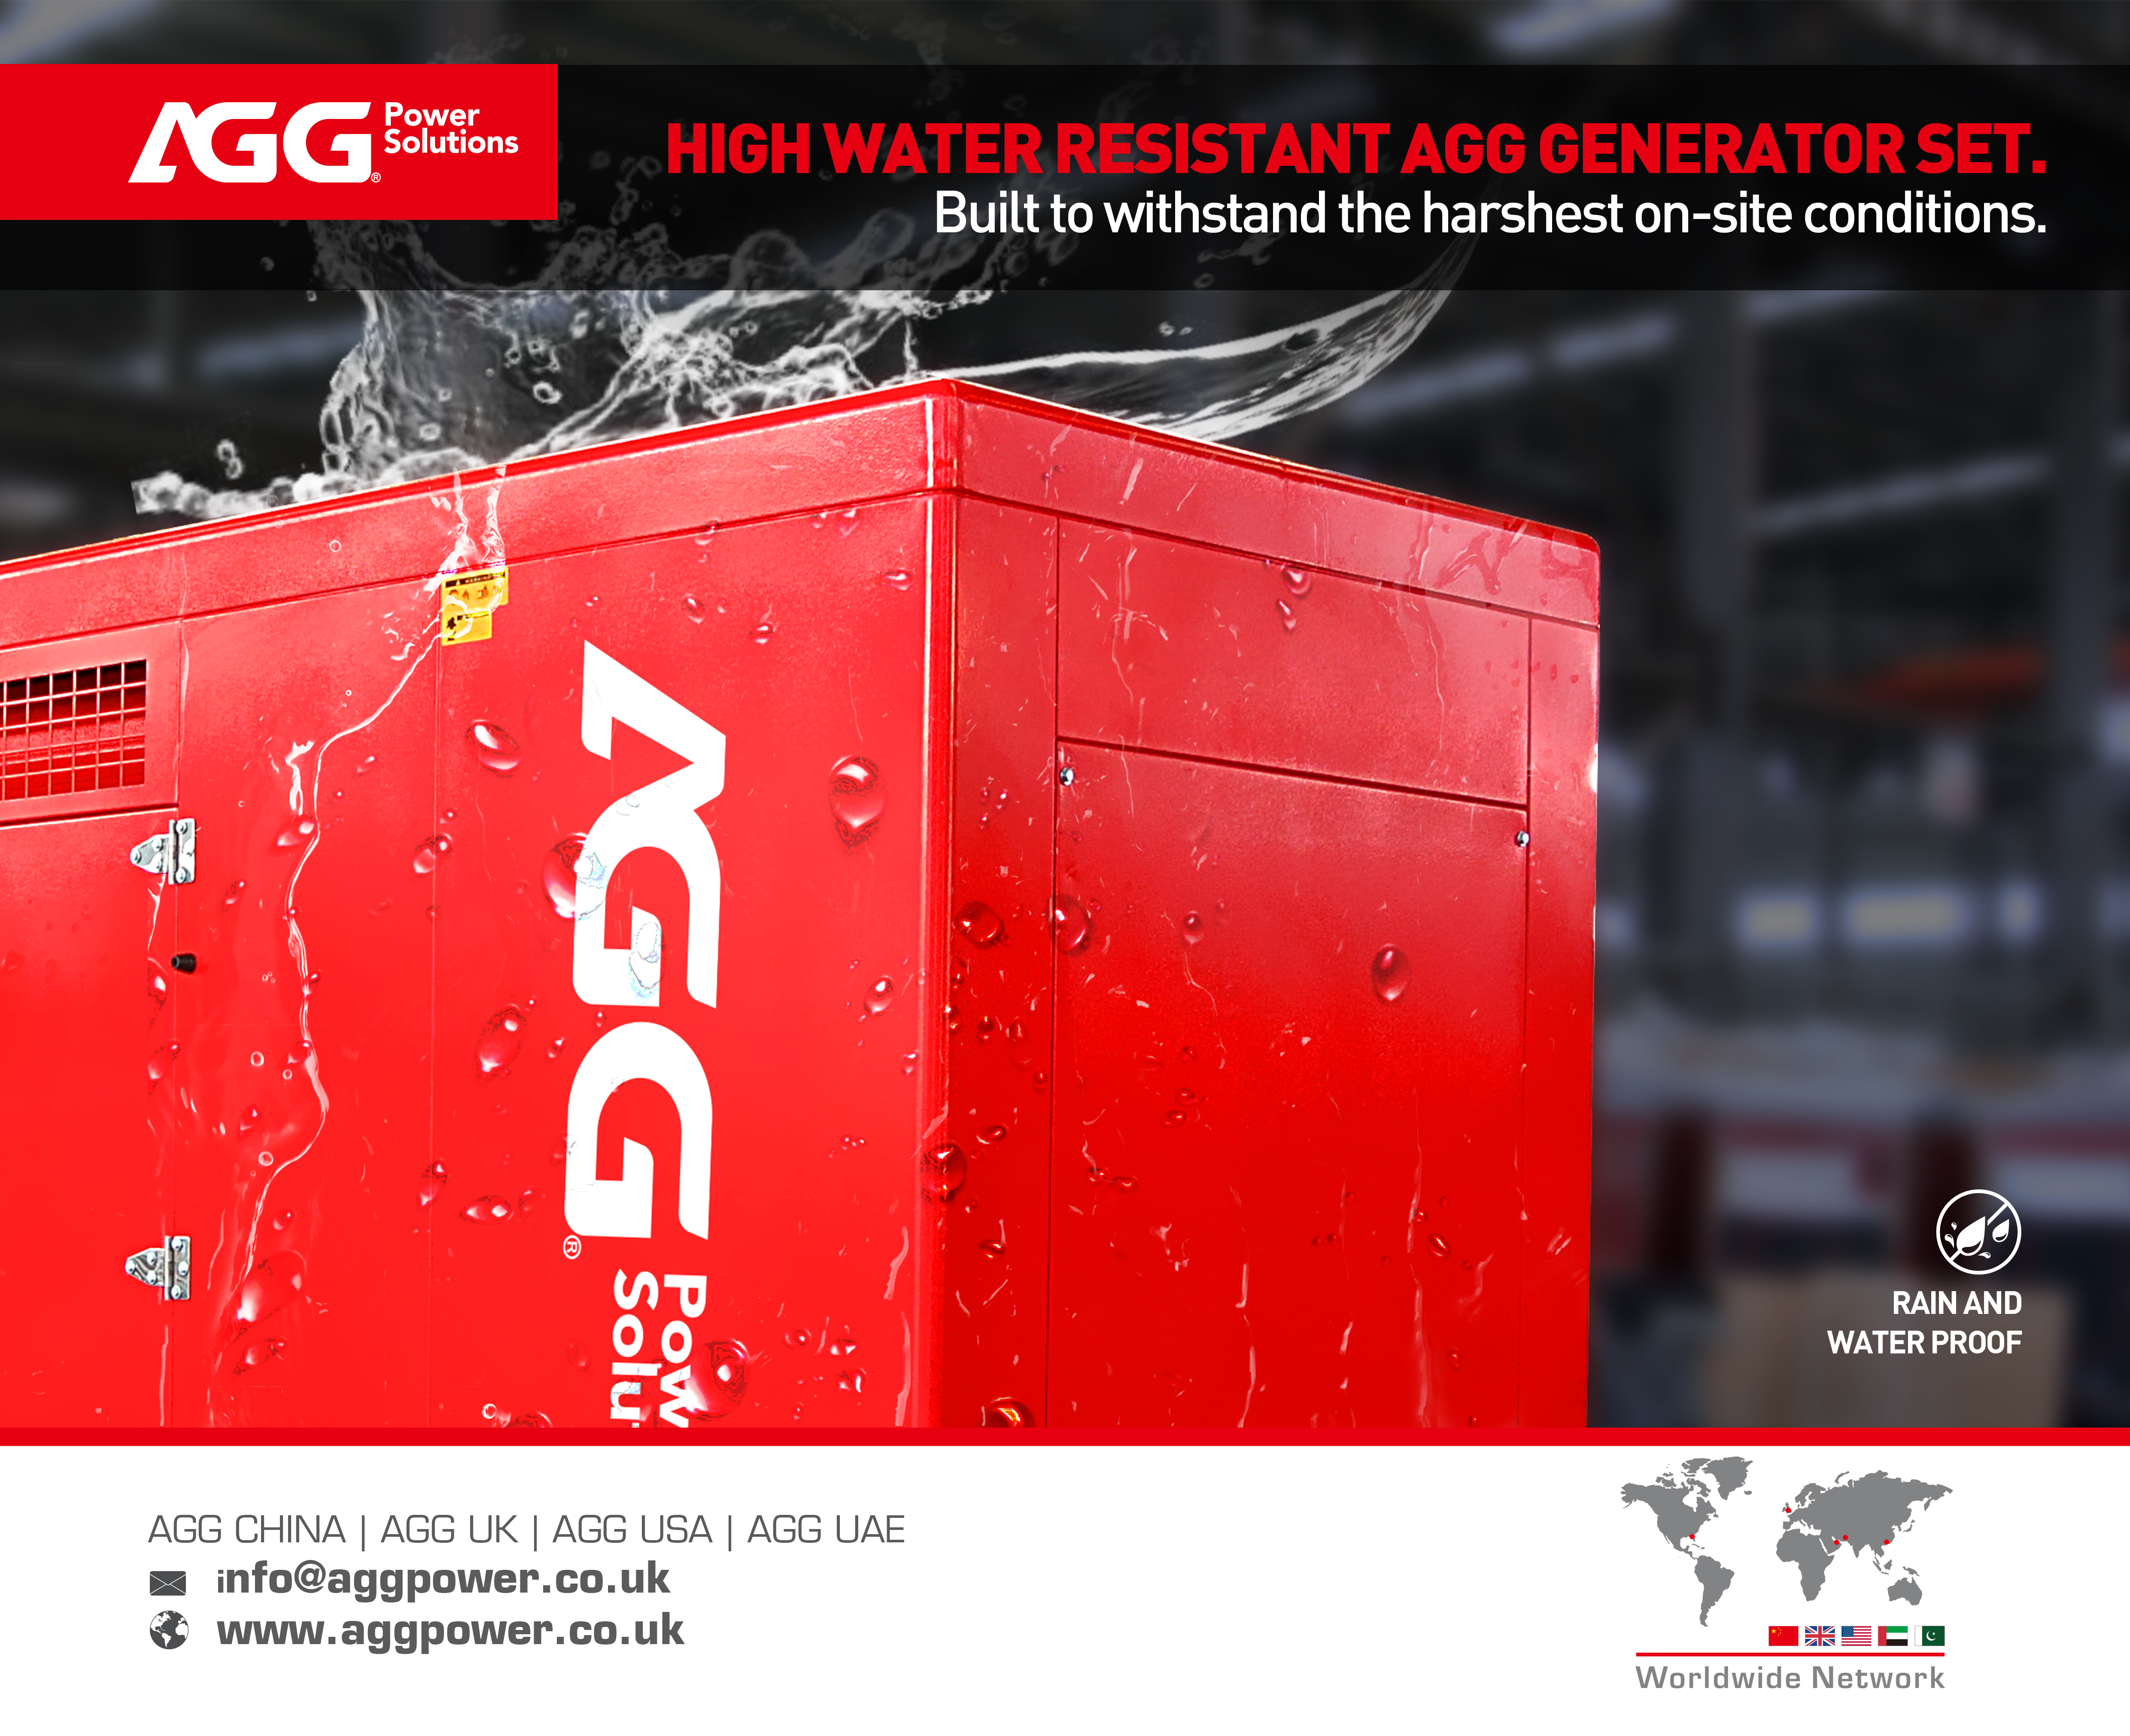 AGG Waterproofed Genset Rain Test: Built to Withstand the Harshest On-site Conditions